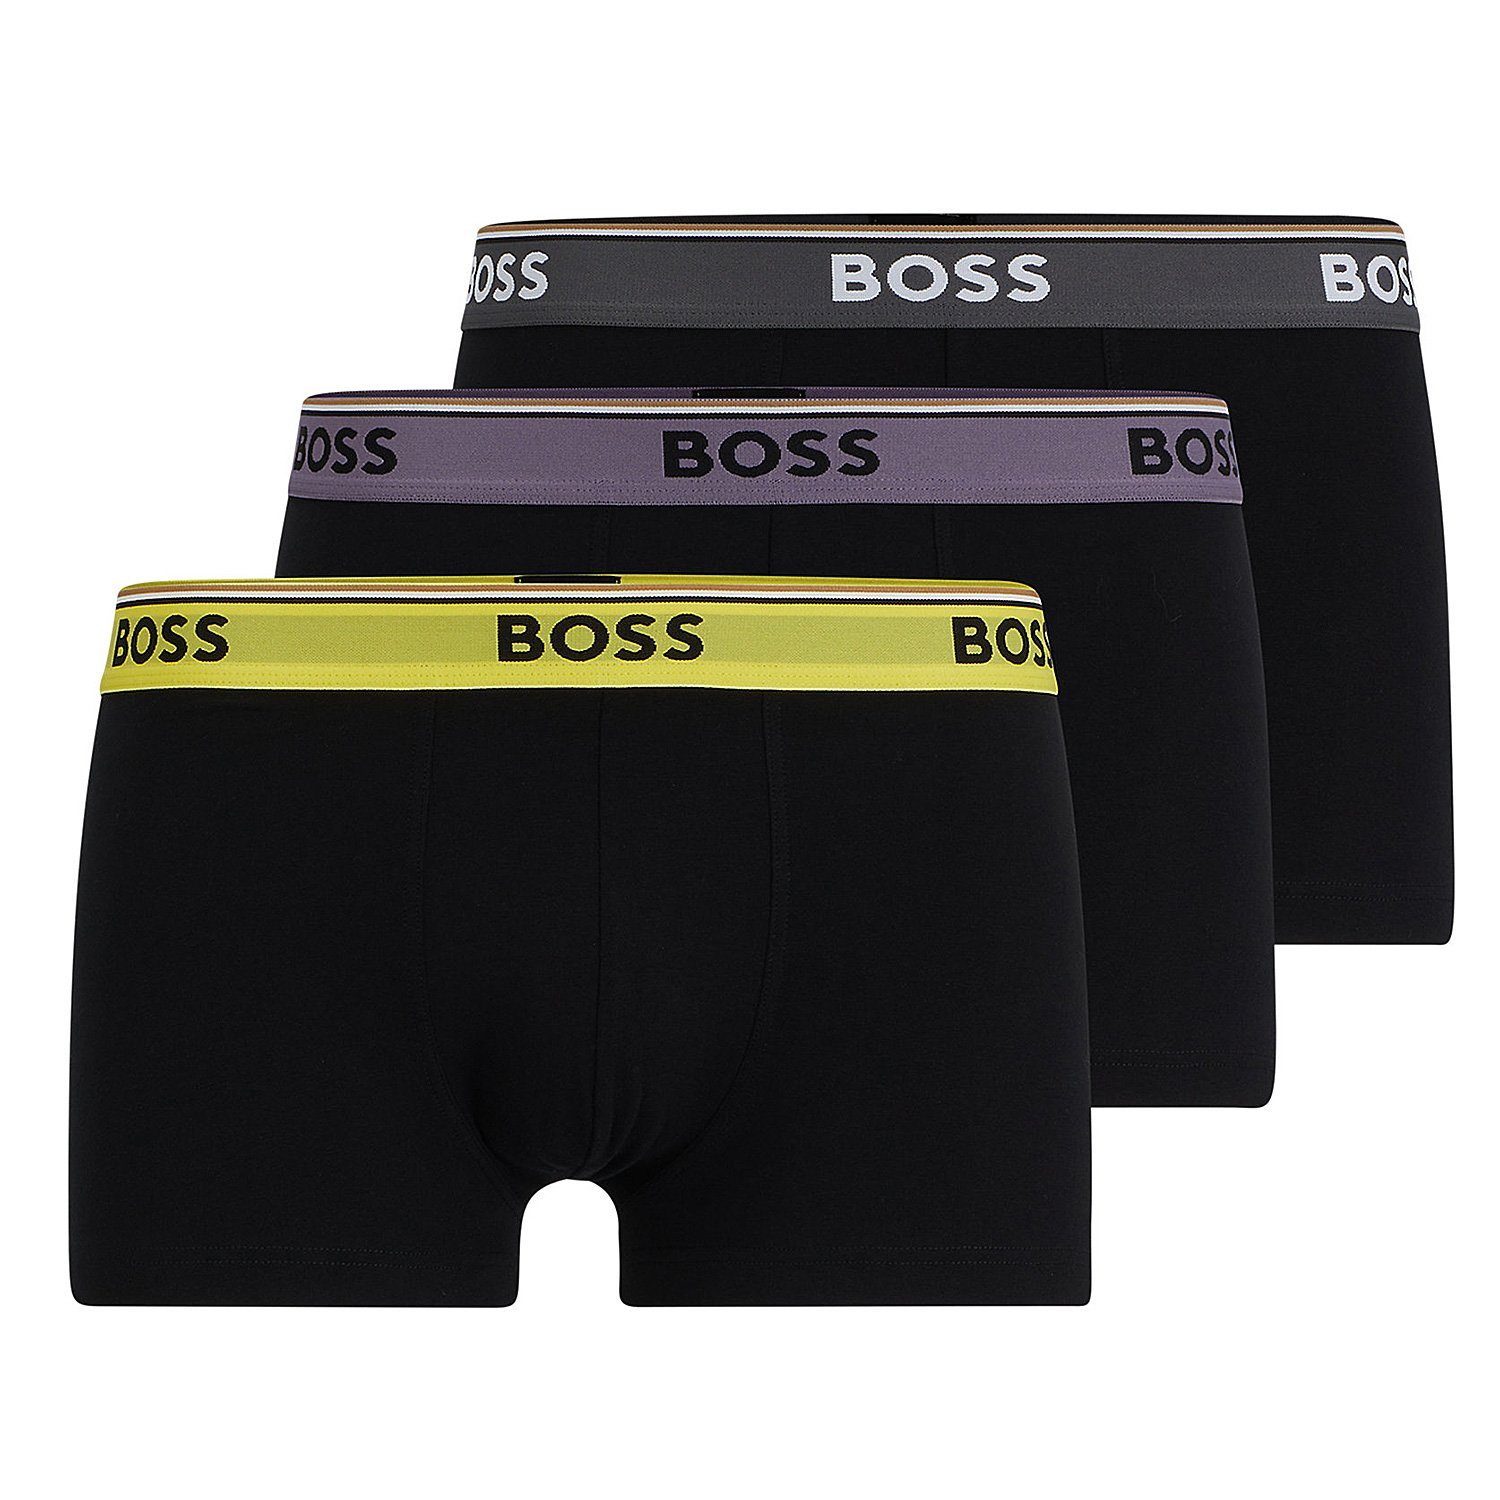 BOSS Trunk 3P Power Cotton Stretch (Packung, 3-St., 3er-Pack) Multi Pack Boxer kurzes Bein Open Misc (978)